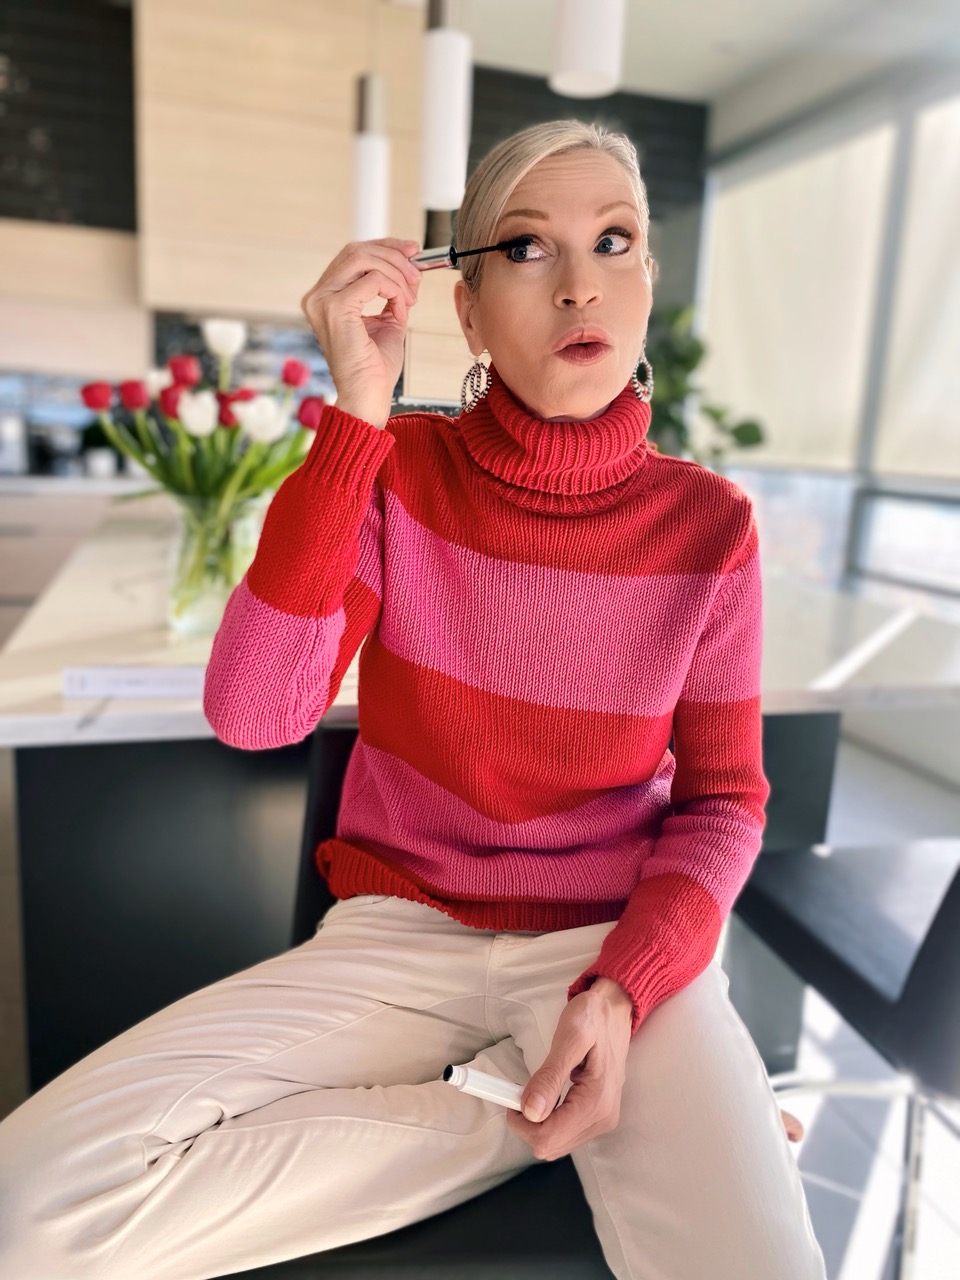 Lifestyle Influencer, Jamie Lewinger of More Than Turquoise, using Trinny London LASH2BROW mascara